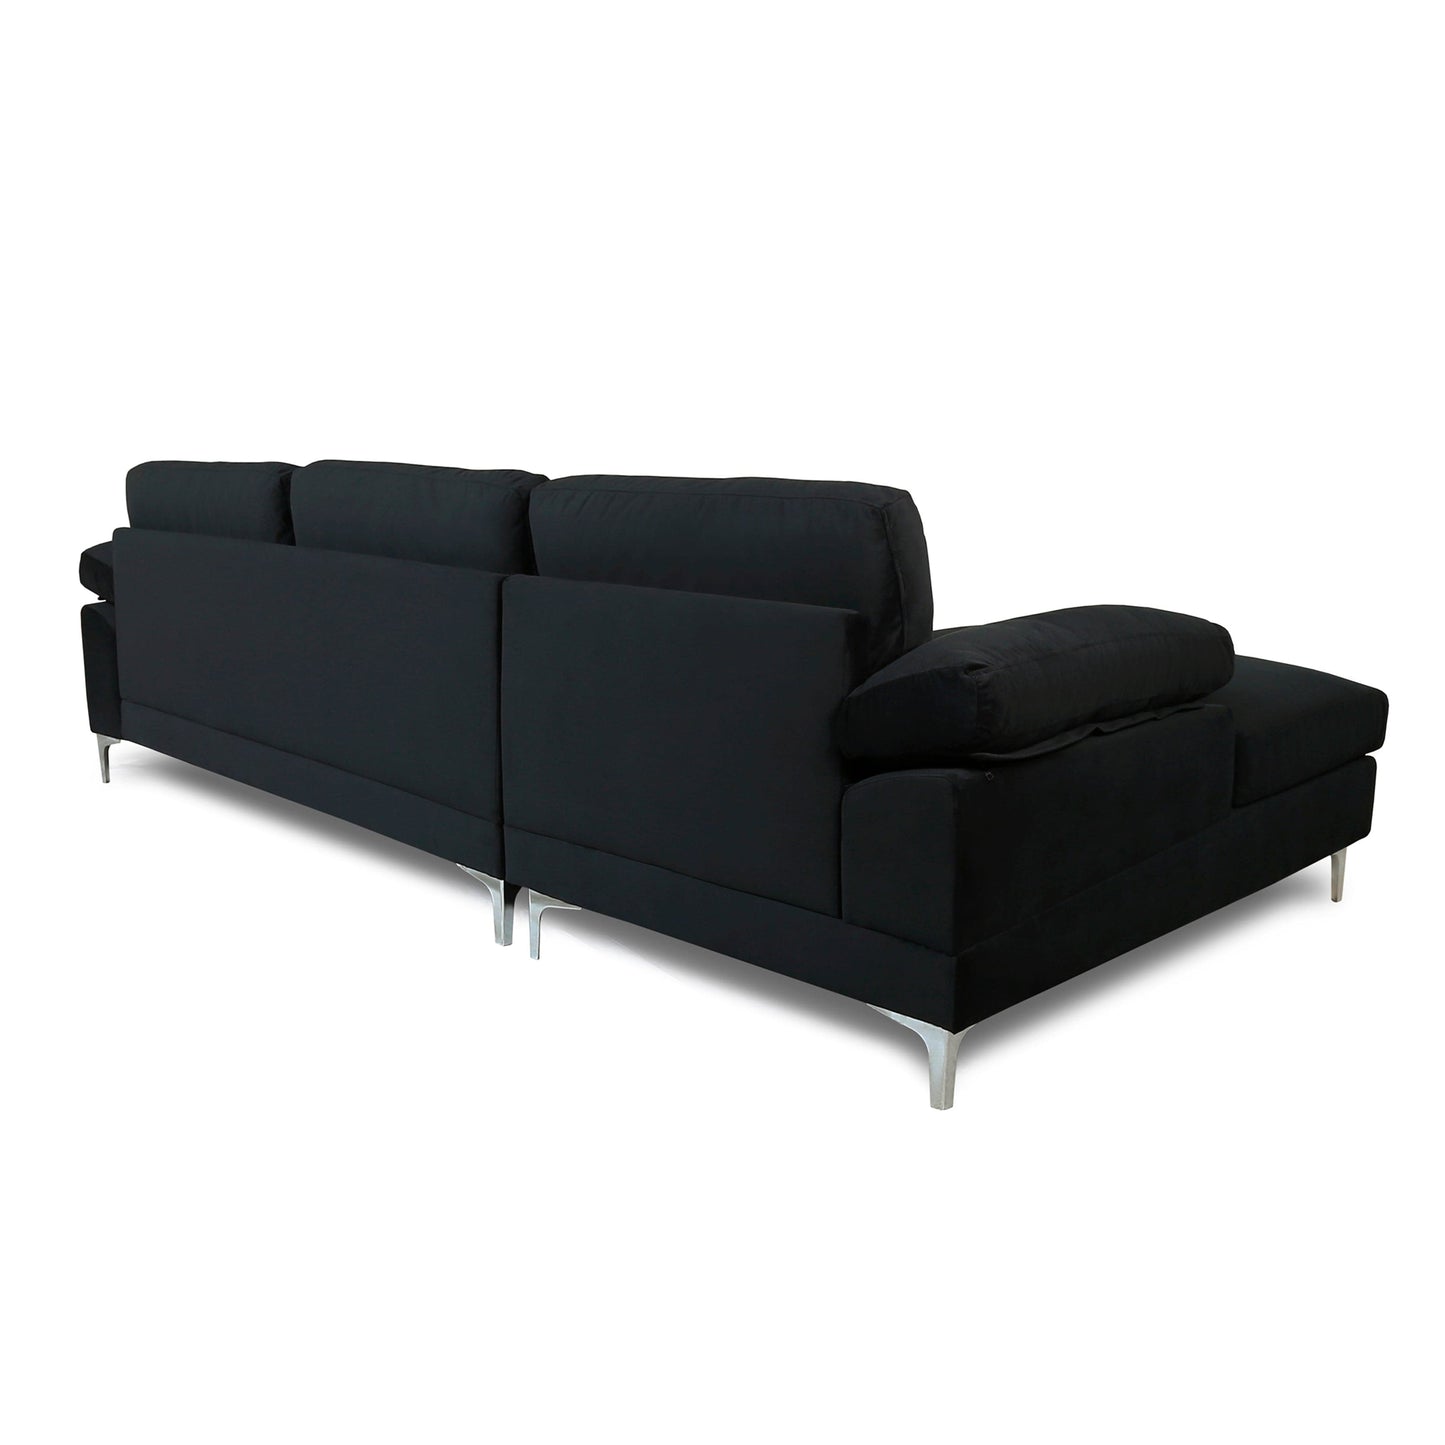 TFC&H Co. SECTIONAL SOFA VELVET LEFT HAND FACING - BLACK- Ships from The US - sectional at TFC&H Co.